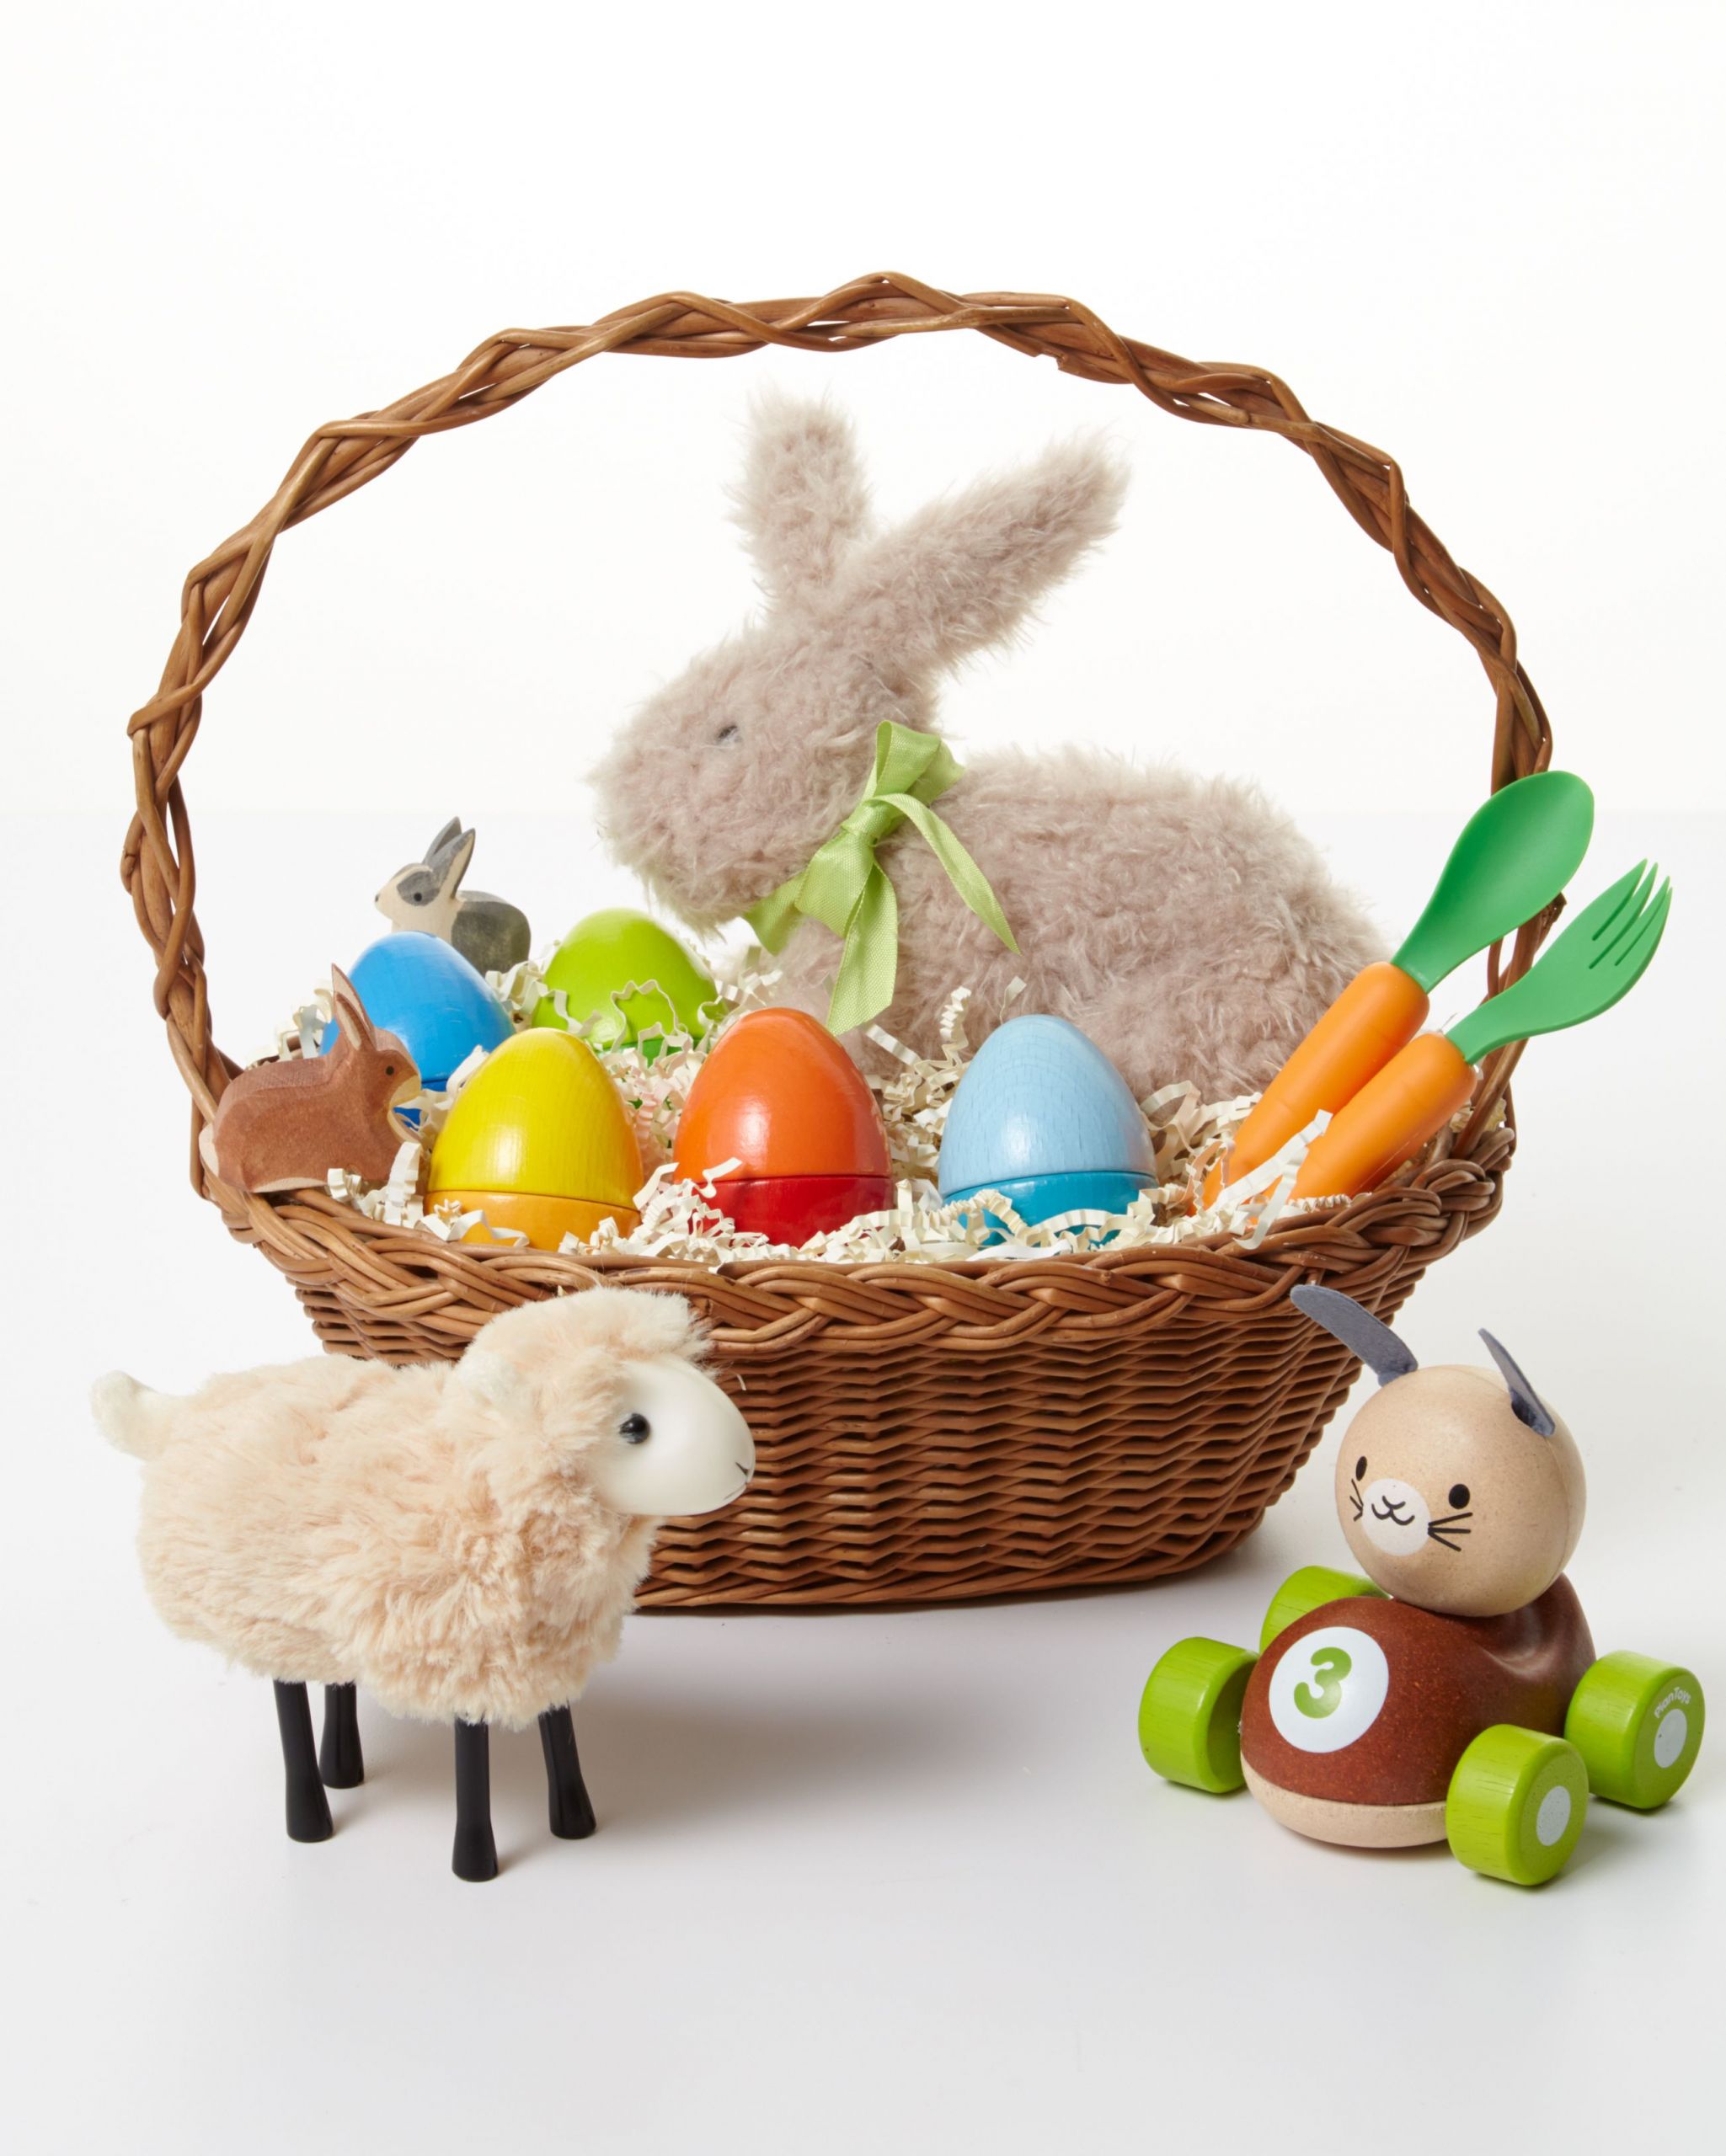 Small Easter Basket Ideas
 21 of Our Best Easter Basket Ideas